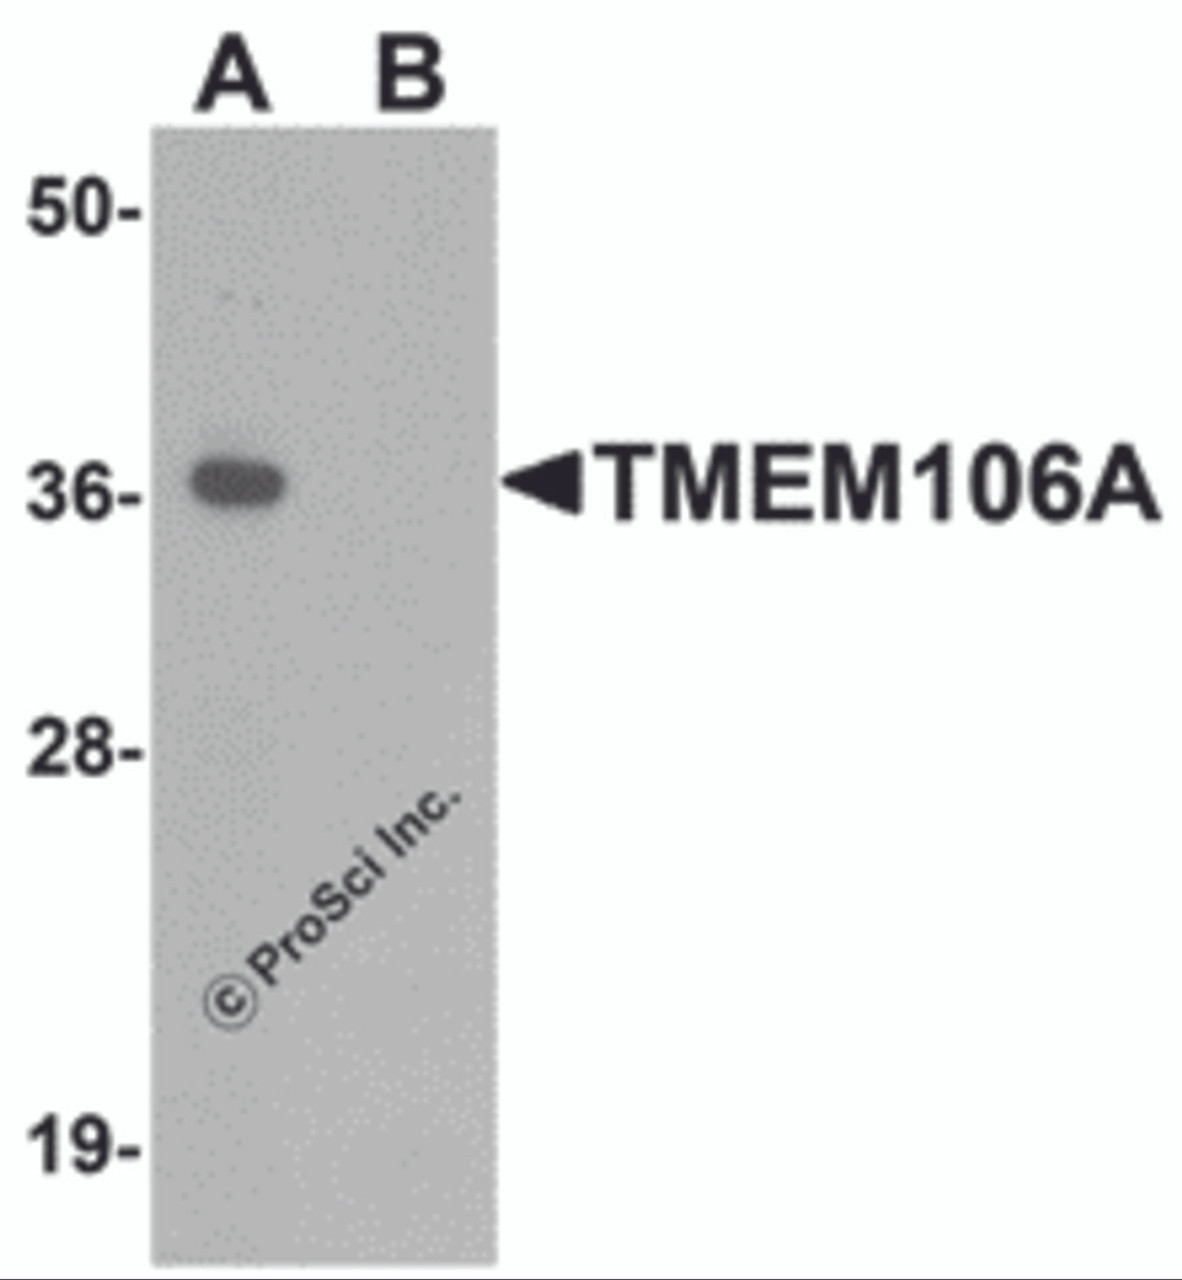 Western blot analysis of TMEM106A in A-20 cell lysate with TMEM106A antibody at 1 &#956;g/mL in (A) the absence and (B) the presence of blocking peptide.